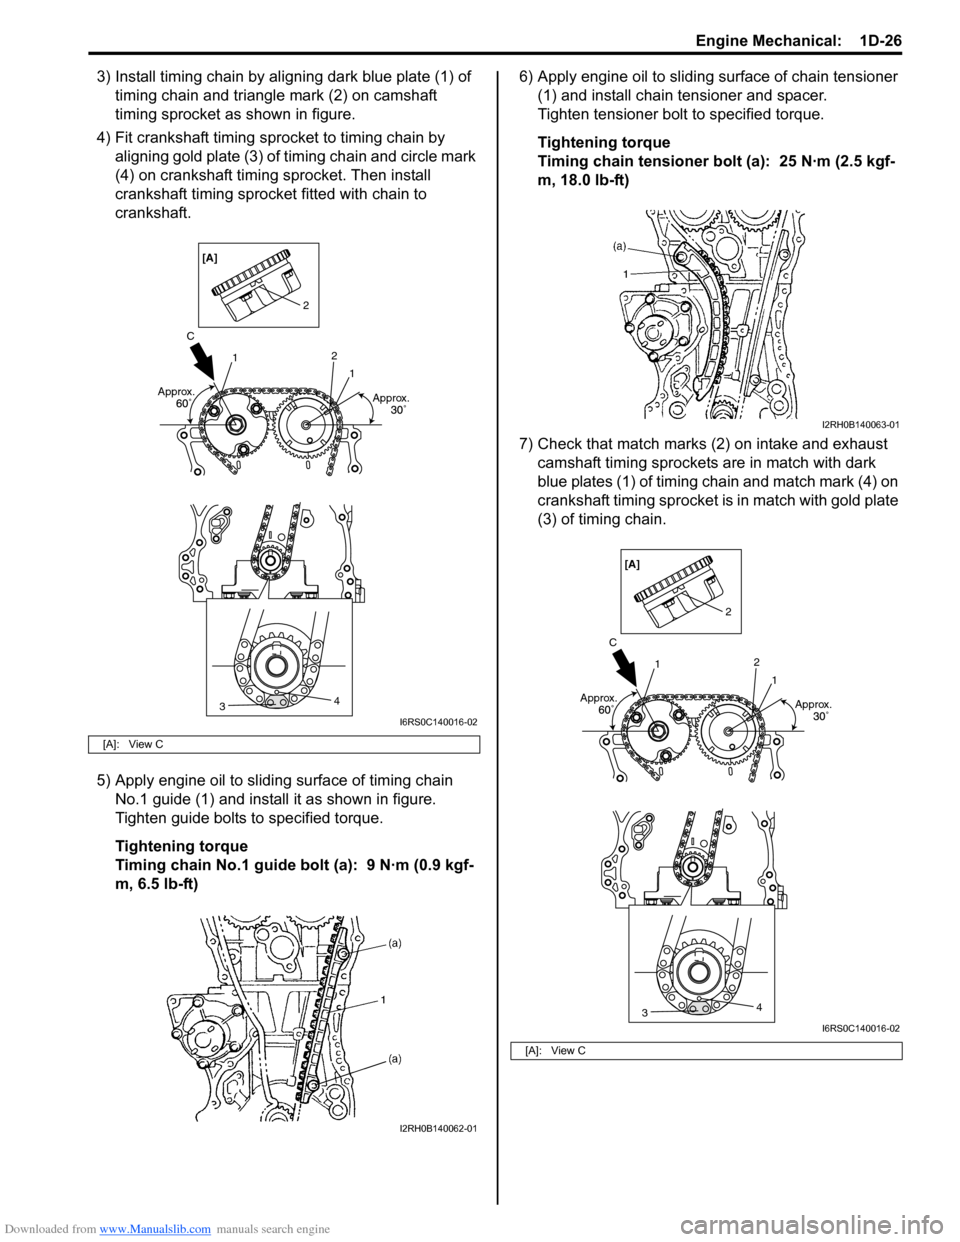 SUZUKI SWIFT 2008 2.G Service Owners Guide Downloaded from www.Manualslib.com manuals search engine Engine Mechanical:  1D-26
3) Install timing chain by aligning dark blue plate (1) of timing chain and triangle mark (2) on camshaft 
timing spr